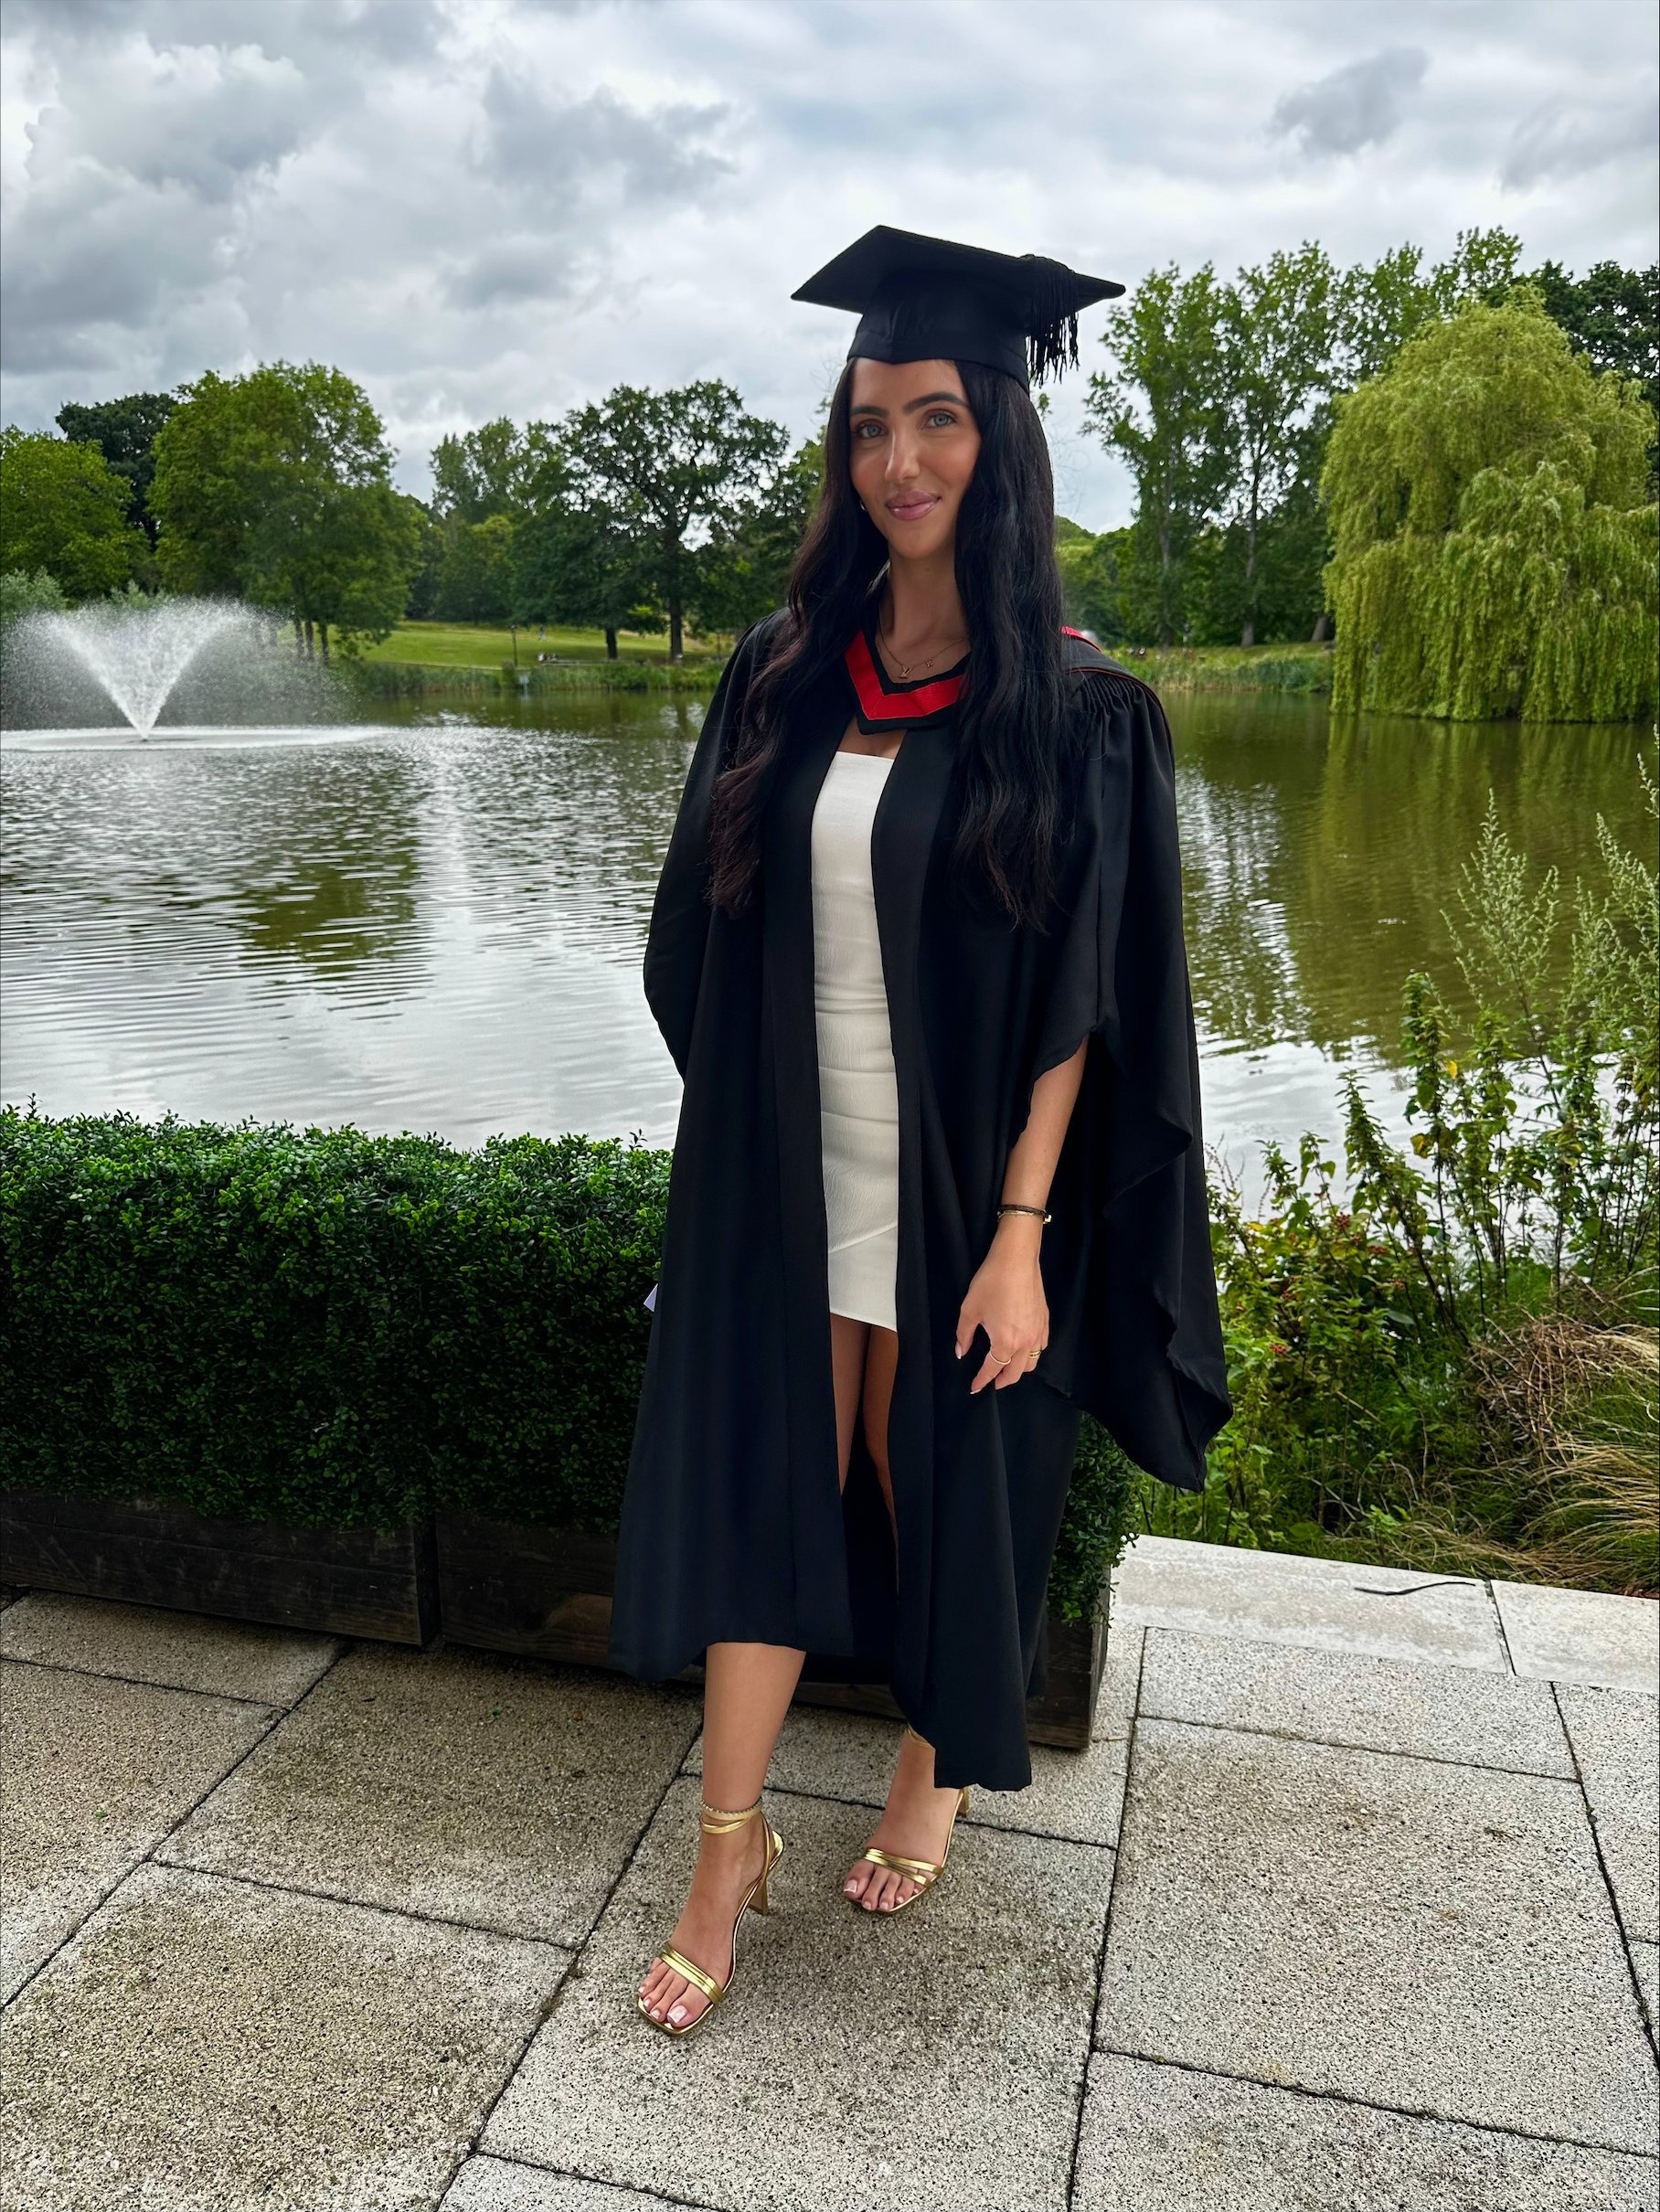 Student Leila in a graduation gown standing in front of a lake